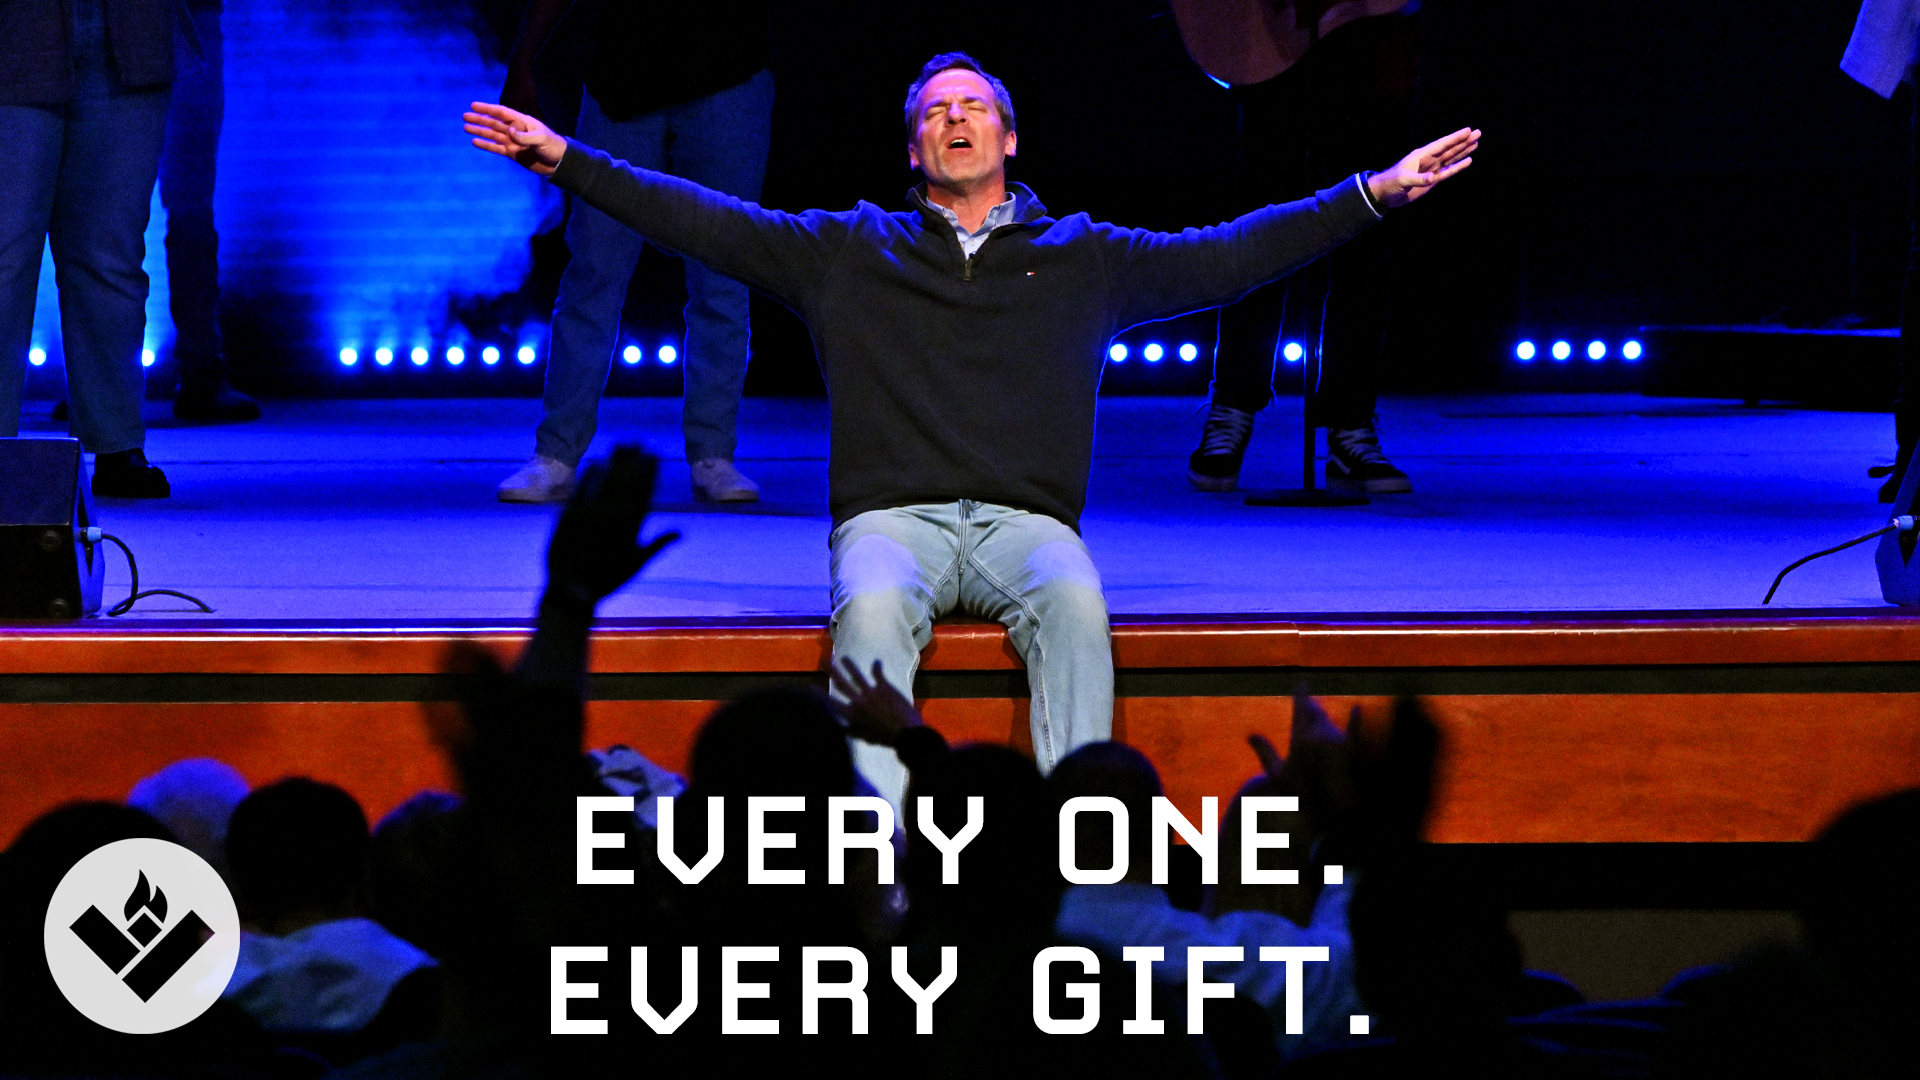 Every One. Every Gift.